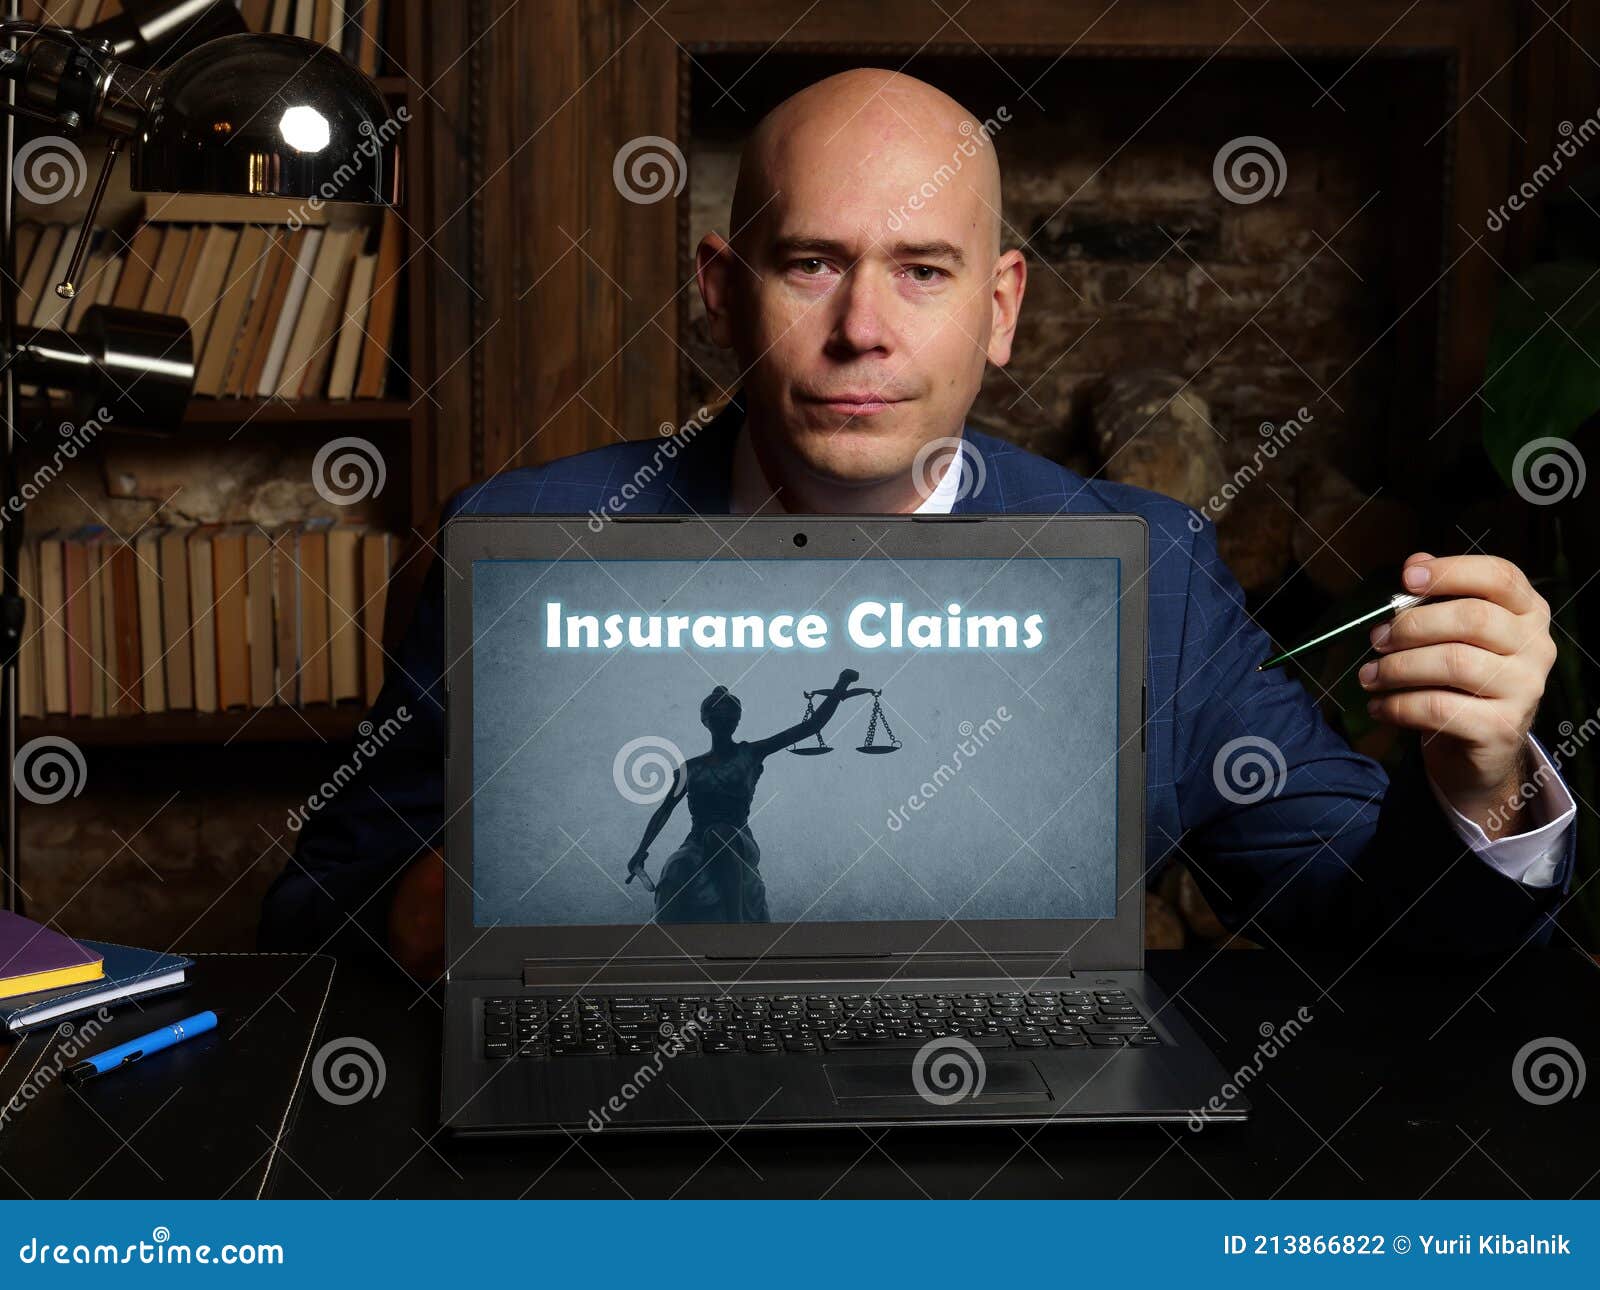 business concept about insurance claims with inscription on laptop